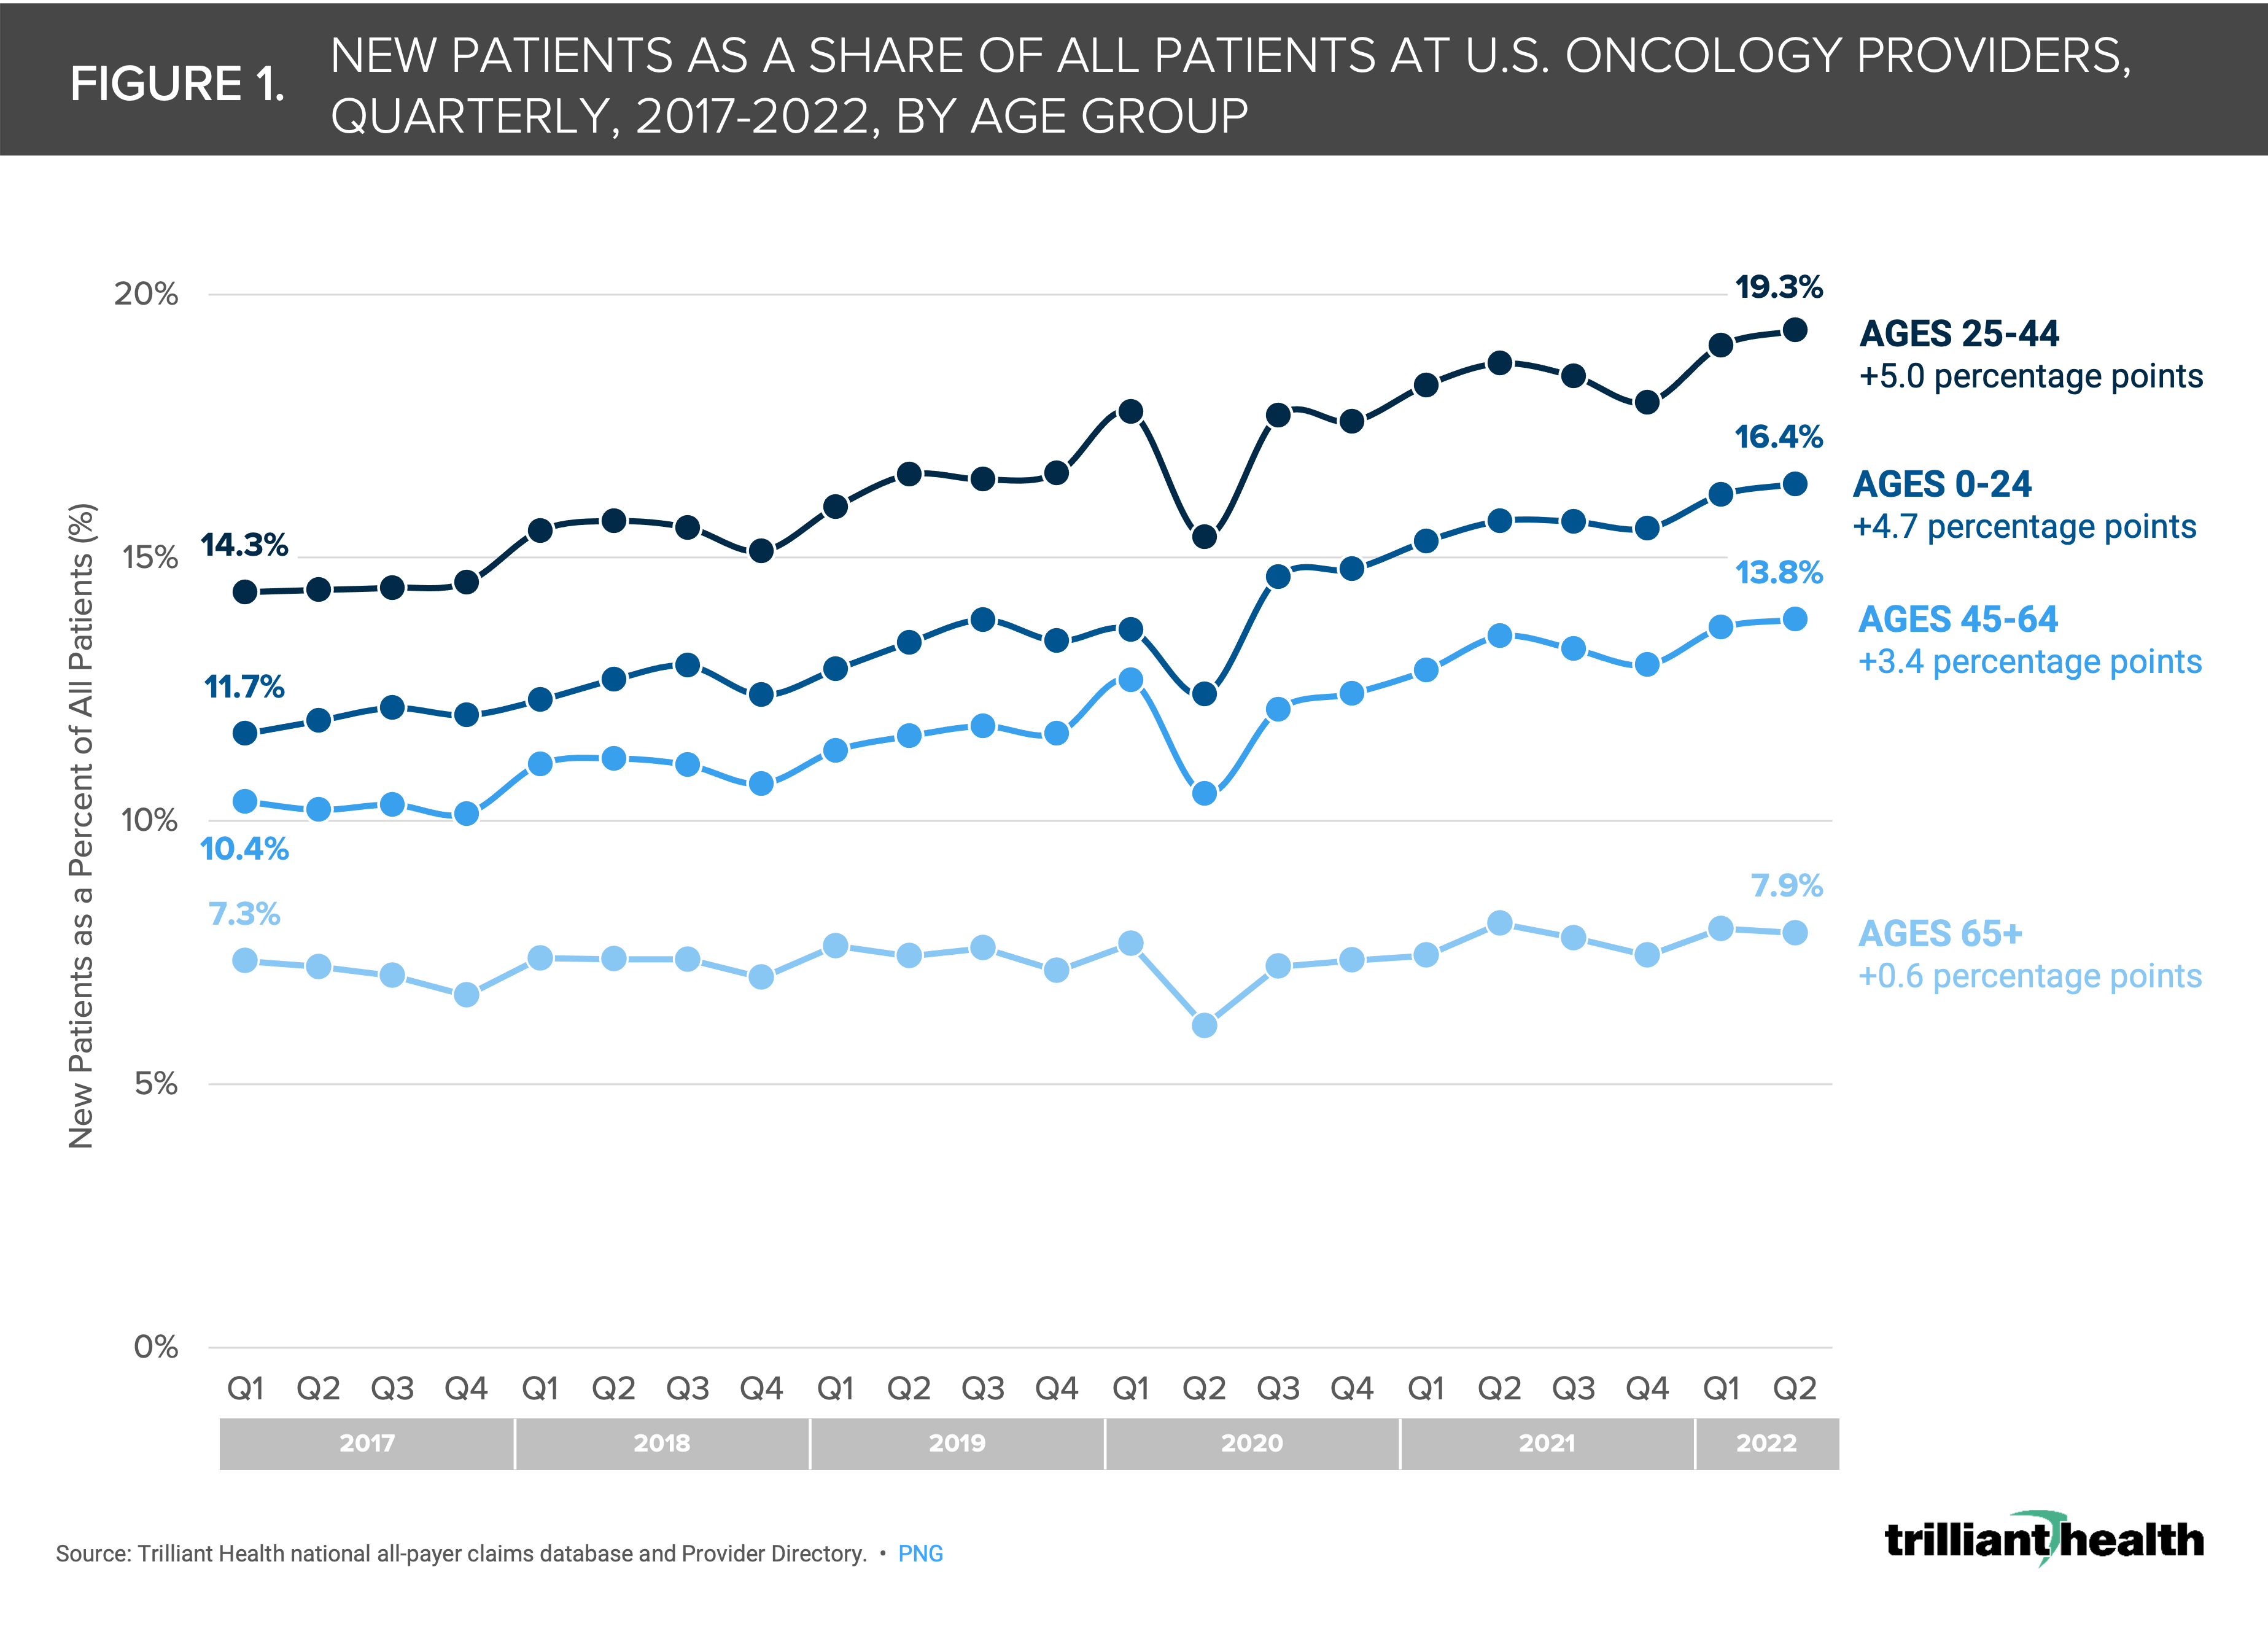 The Share of Younger Patients Seeing Oncology Providers Is Increasing Over Time